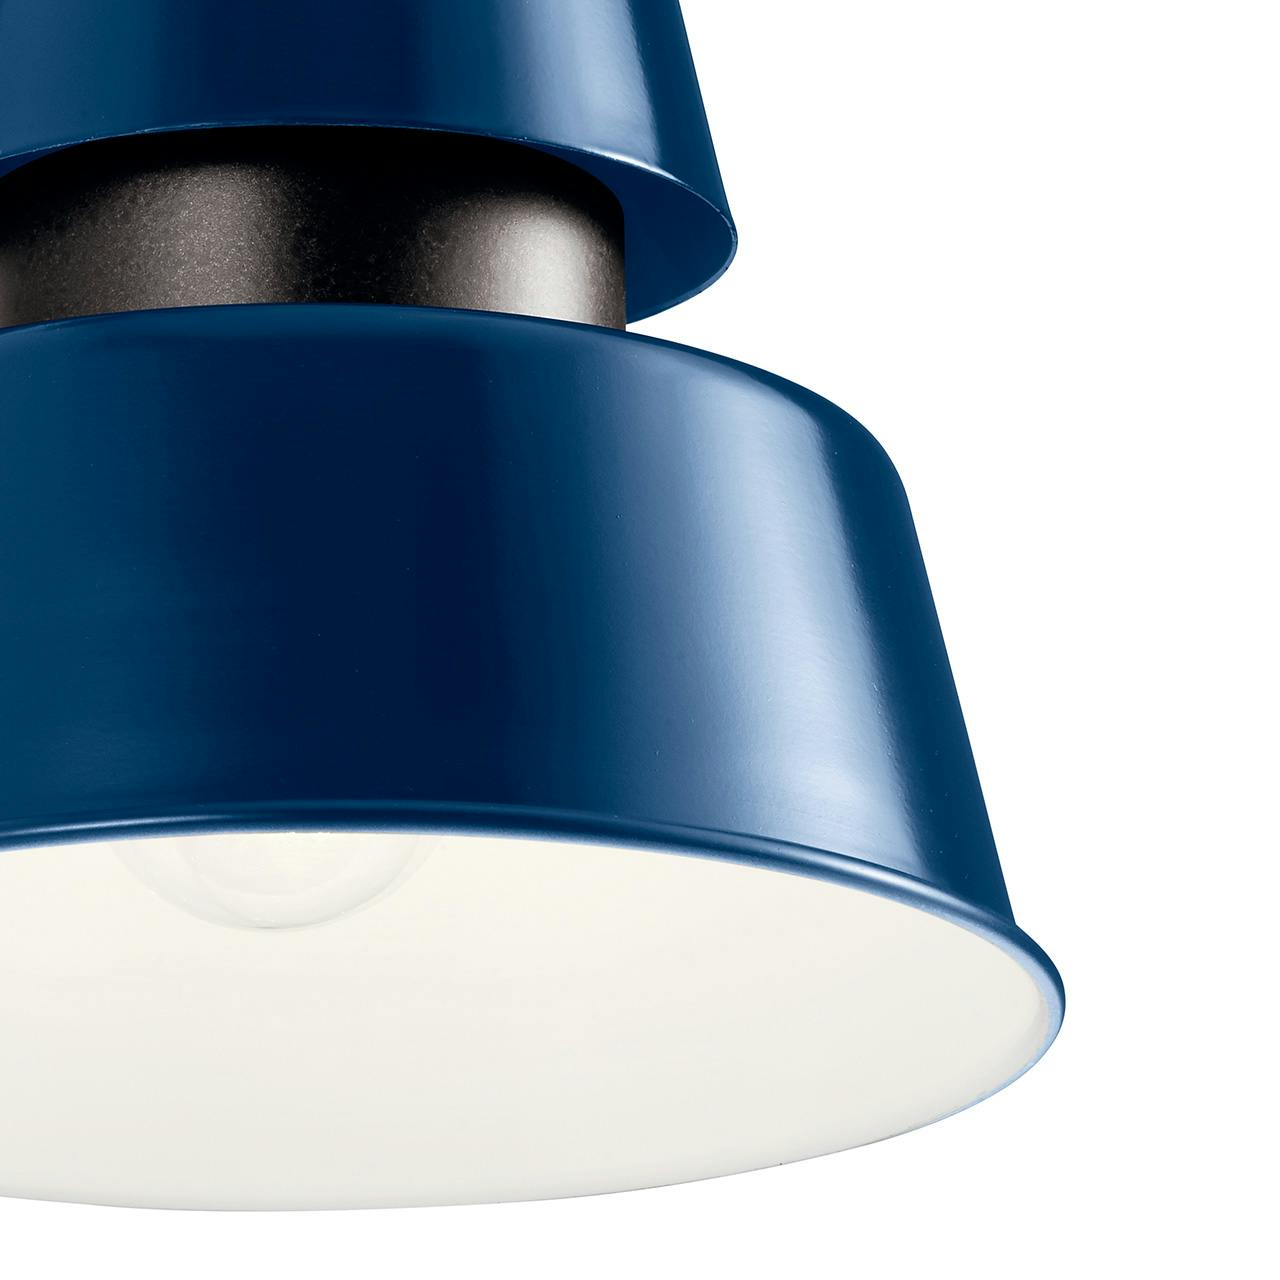 Close up view of the Lozano 13" Wall Light Catalina Blue on a white background